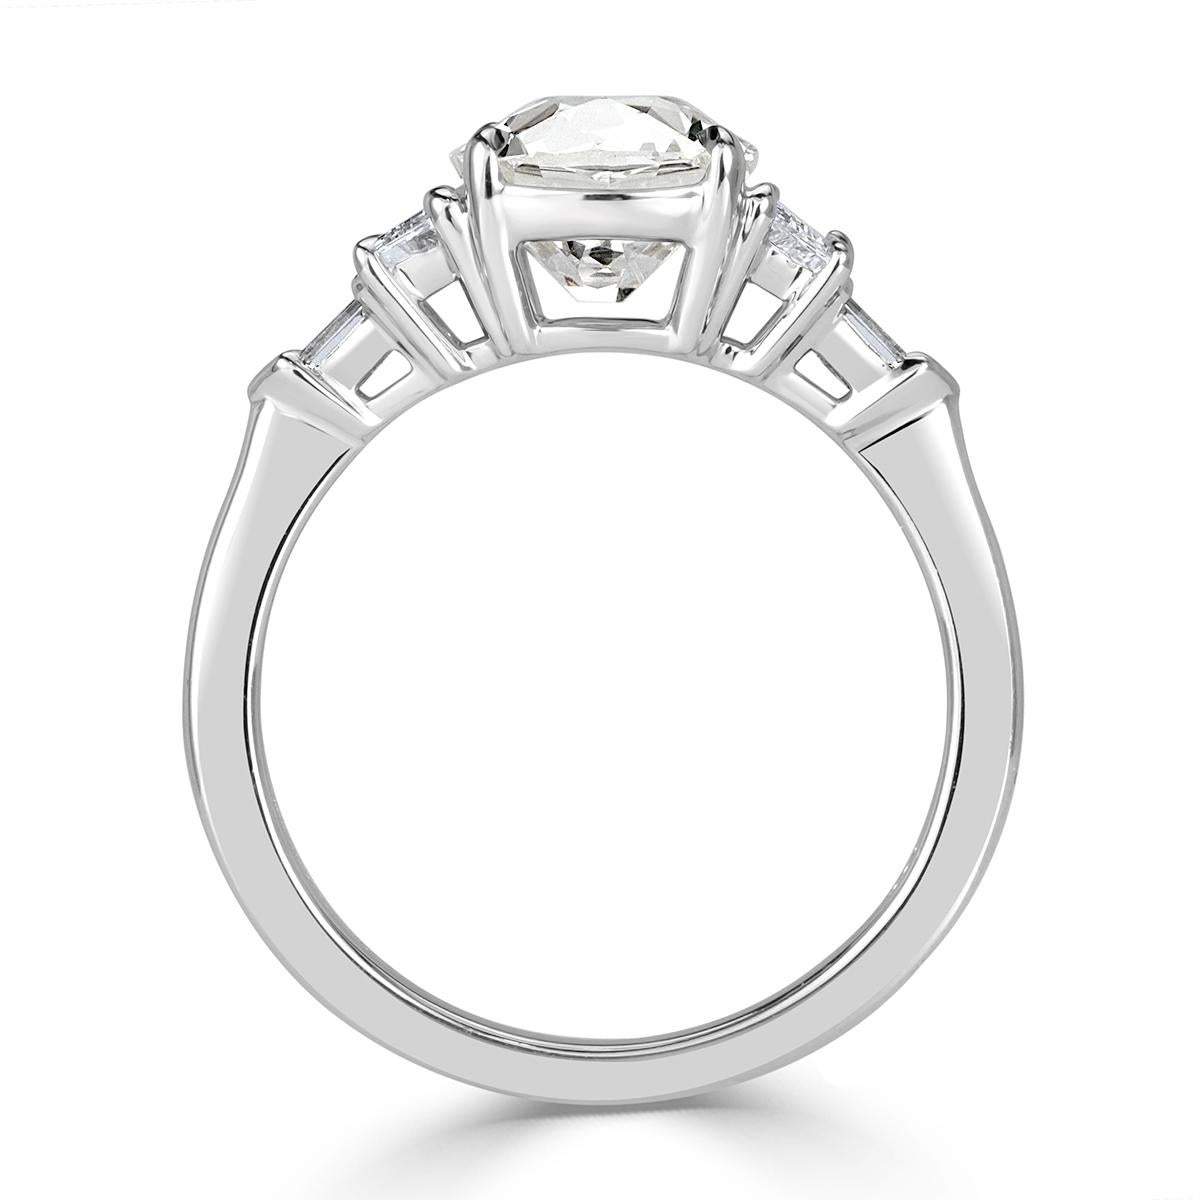 This stunning diamond engagement ring showcases a gorgeous 2.00ct old Mine cut center diamond, GIA certified at G-VS2. It is hand set in high polish 18k white gold and accented by two trapezoid and bullet cut diamonds on either side. The accent